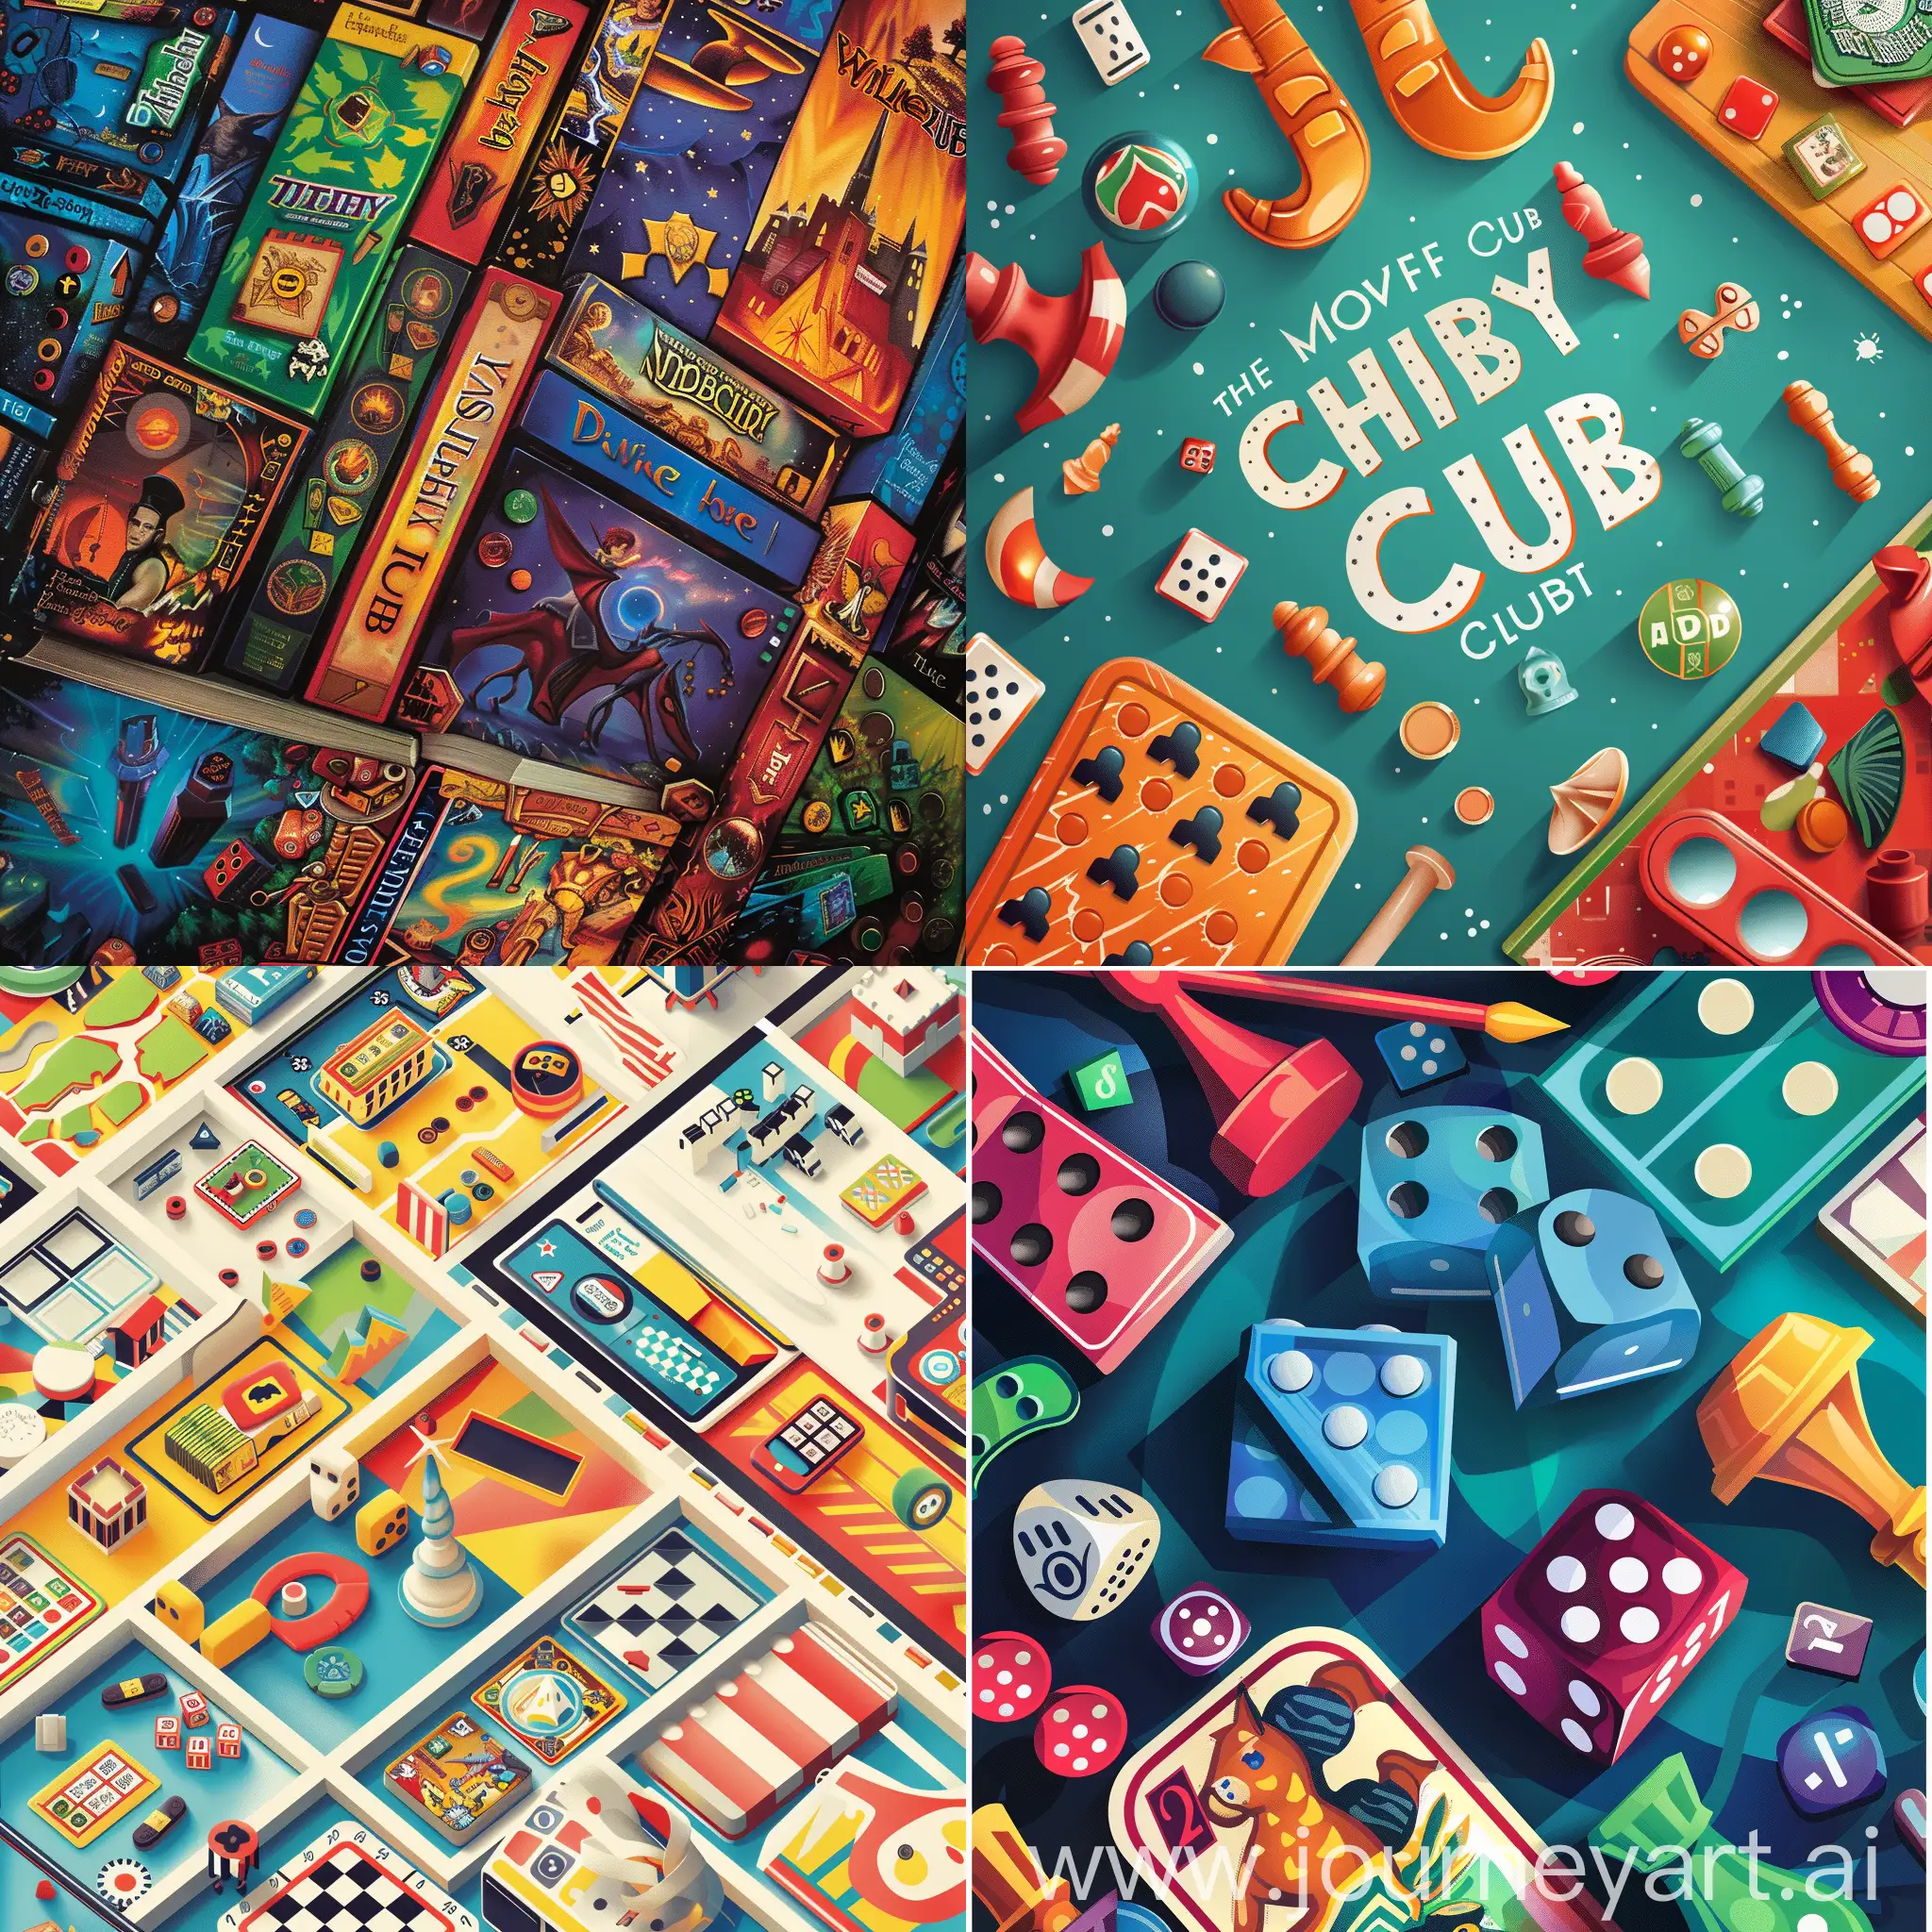 Vibrant-Board-Game-Club-Poster-Engaging-Colorful-Gathering-for-Game-Enthusiasts